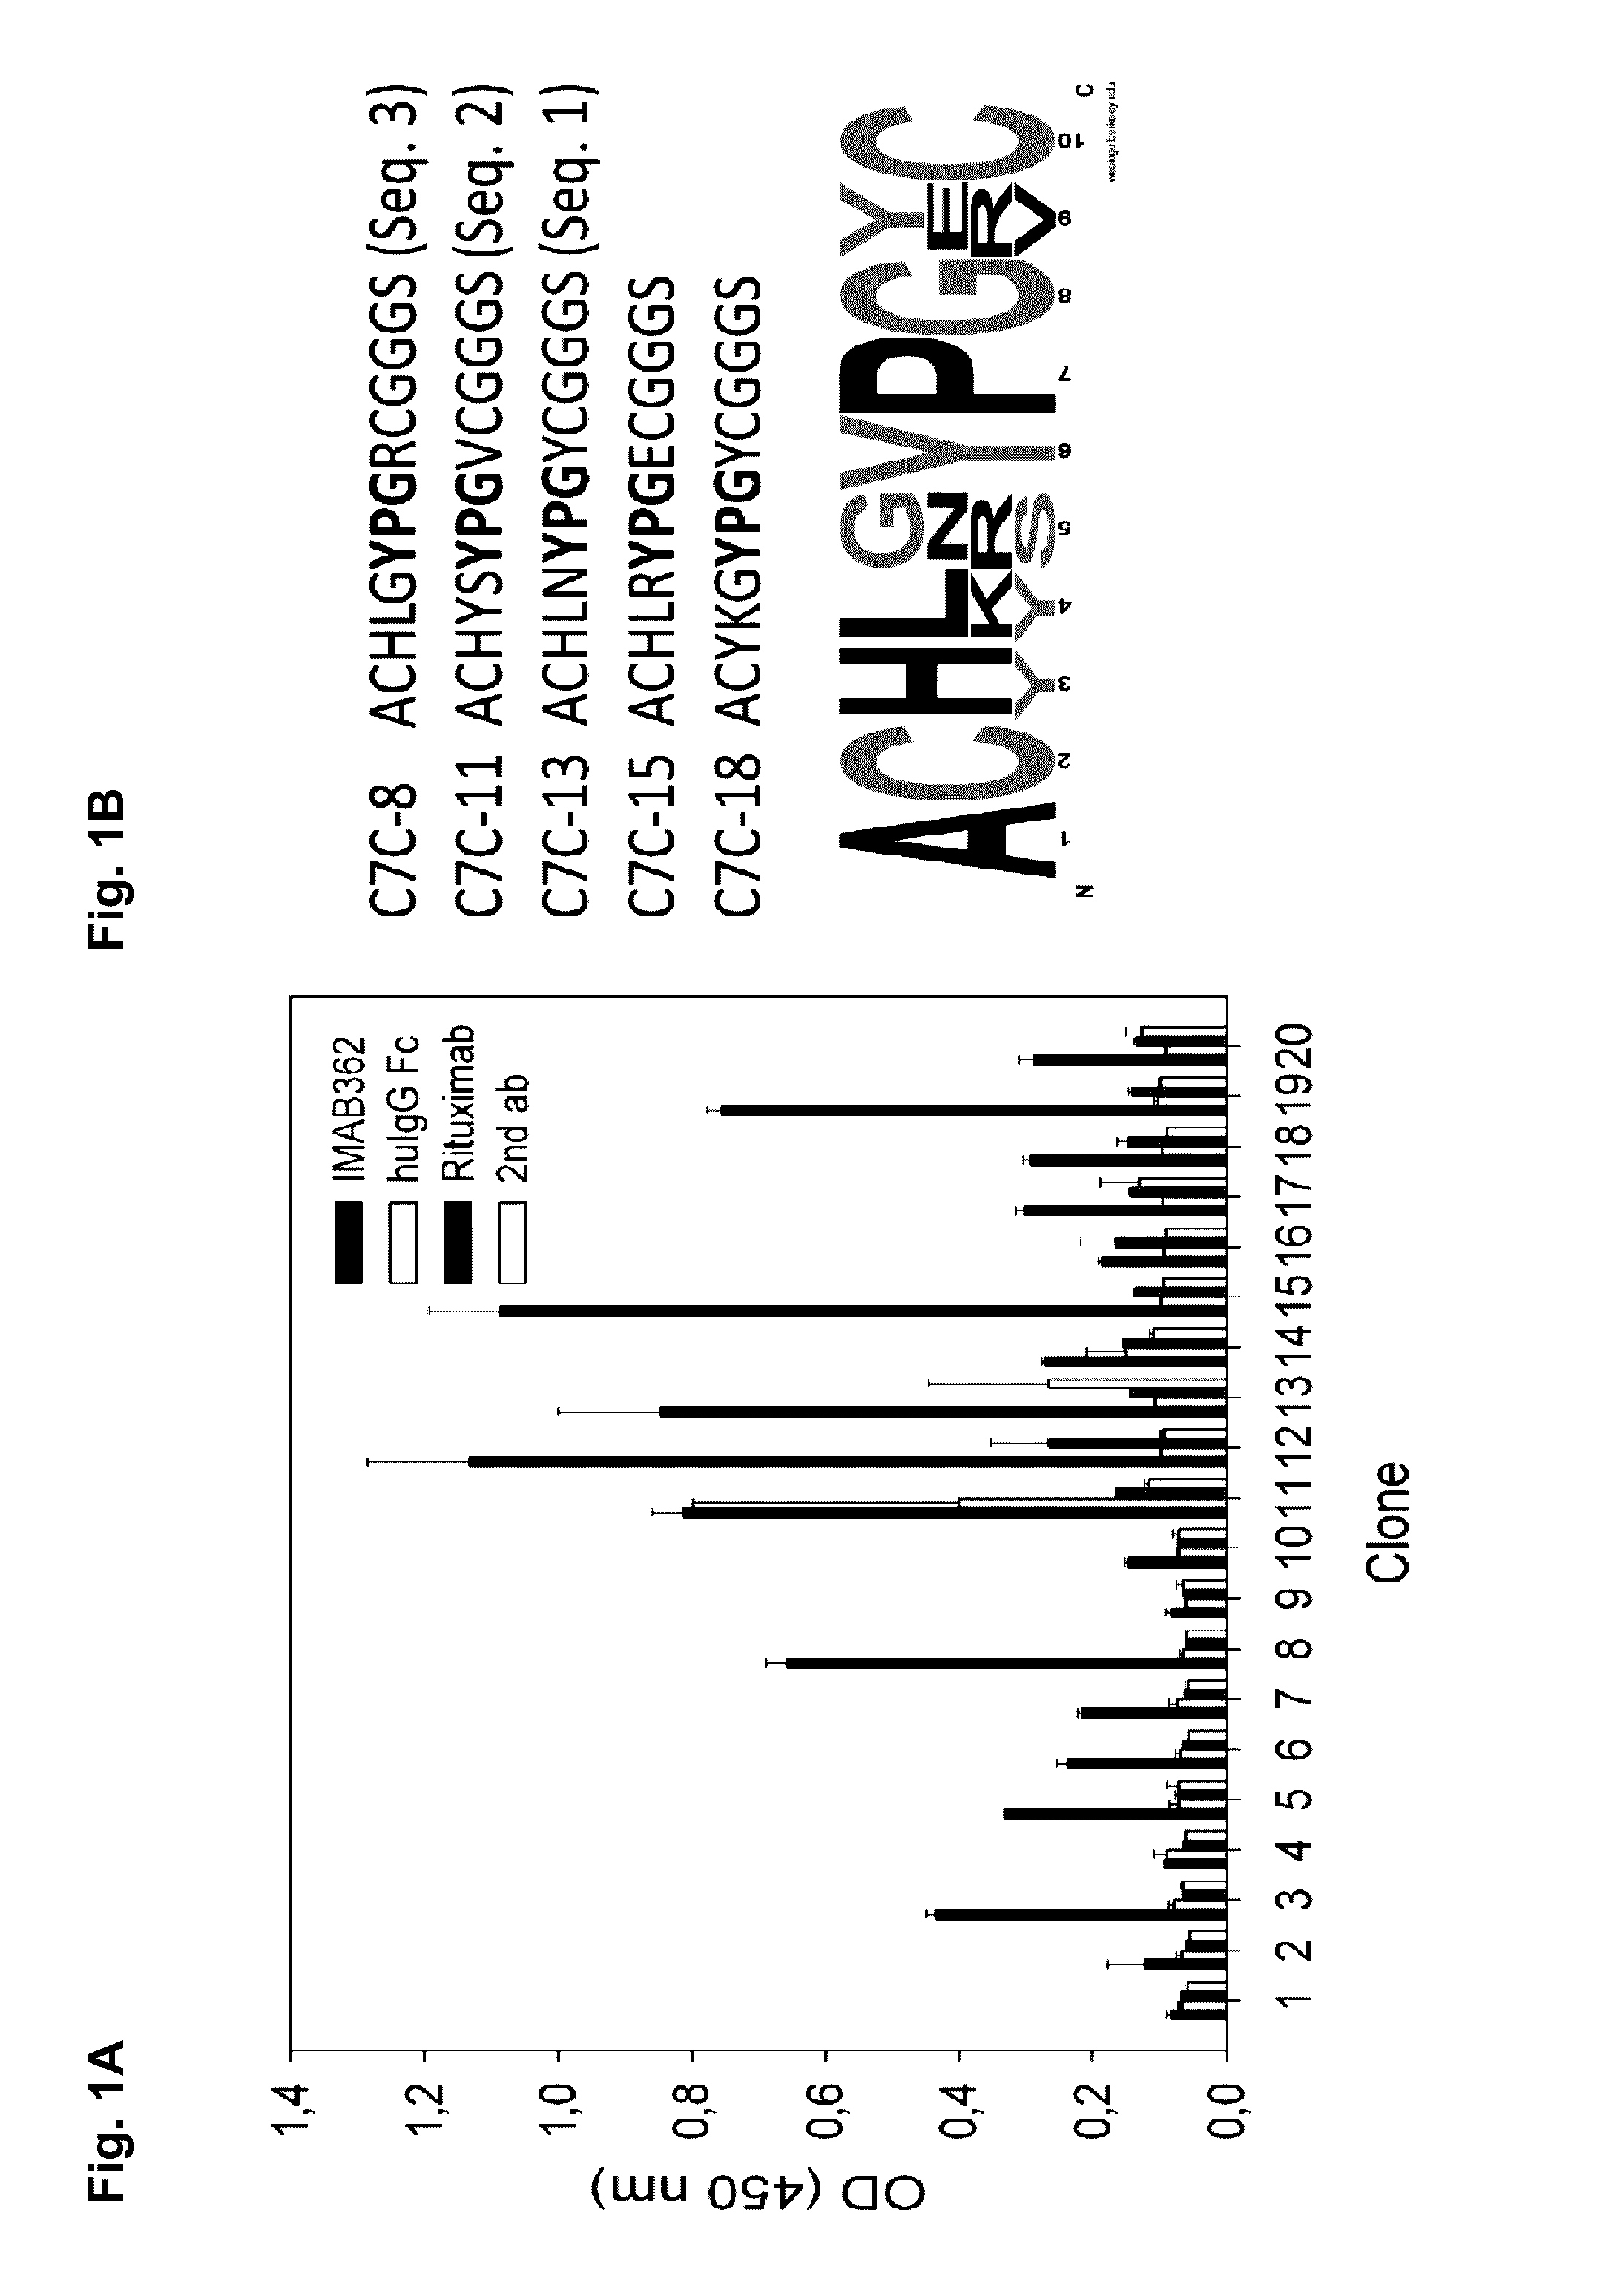 Peptide mimotopes of claudin 18.2 and uses thereof